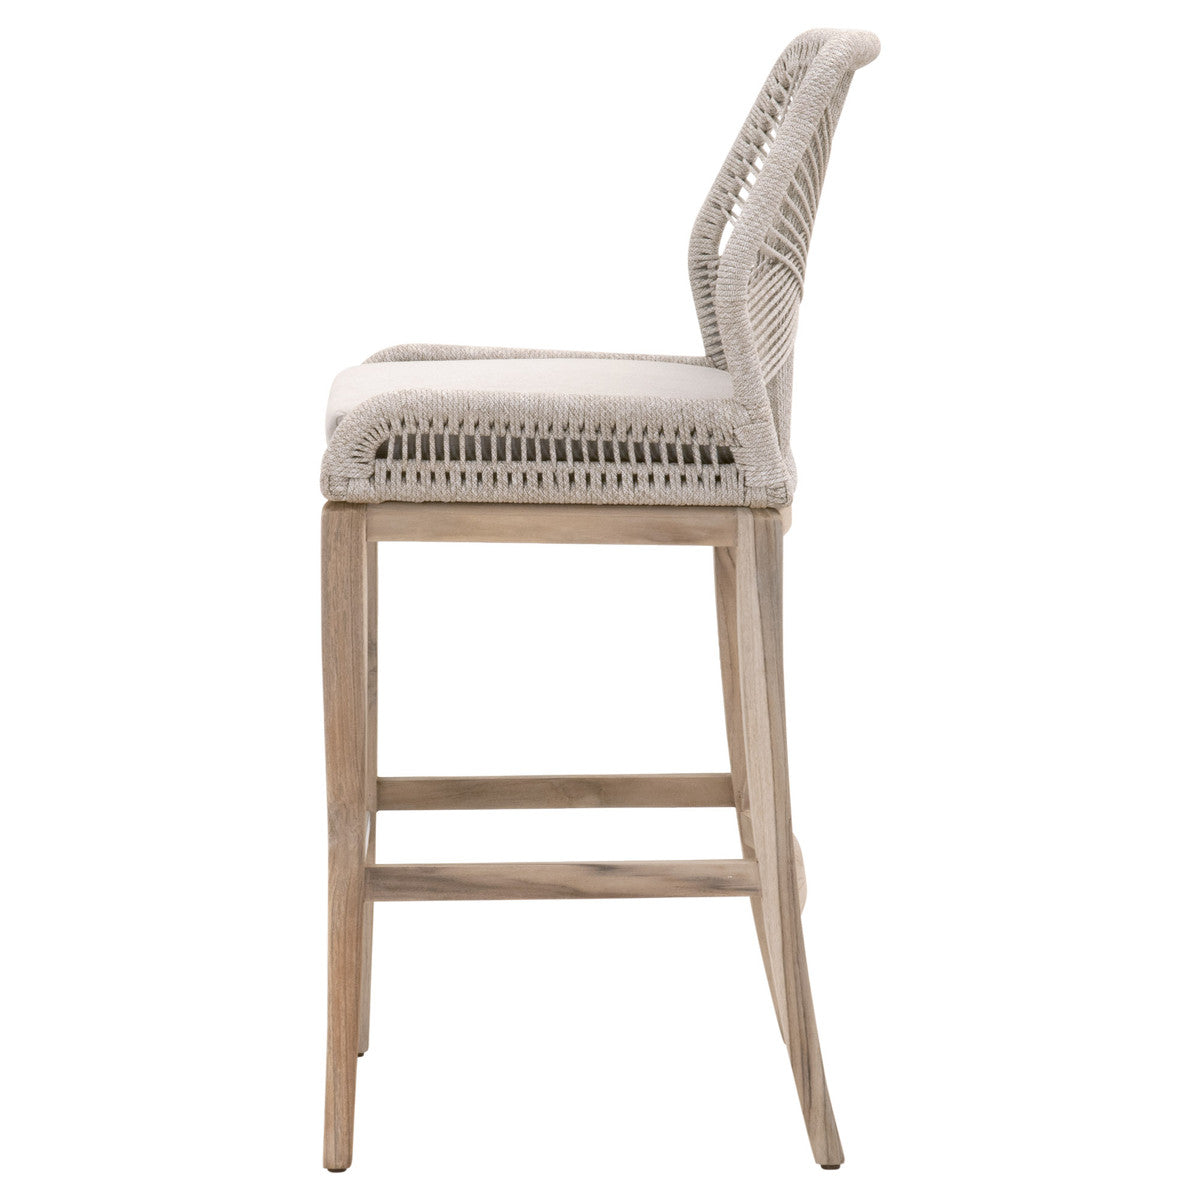 Loom Outdoor Barstool in Taupe & White Flat Rope, Performance Pumice, Gray Teak - 6808BS.WTA/PUM/GT